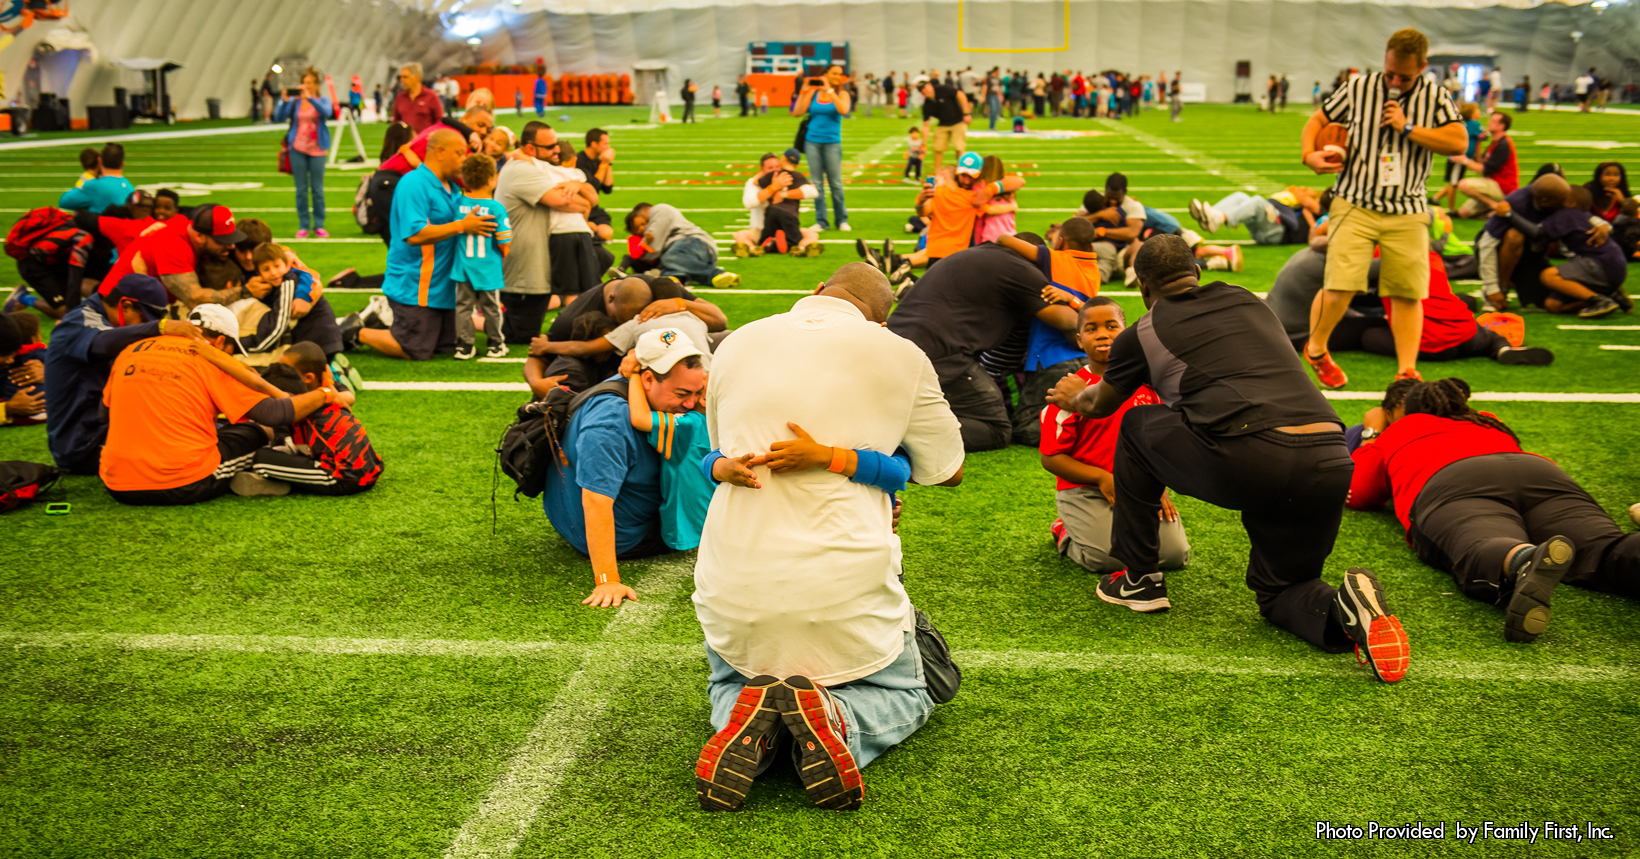 Children and adults talk and hug after an event on a football field.